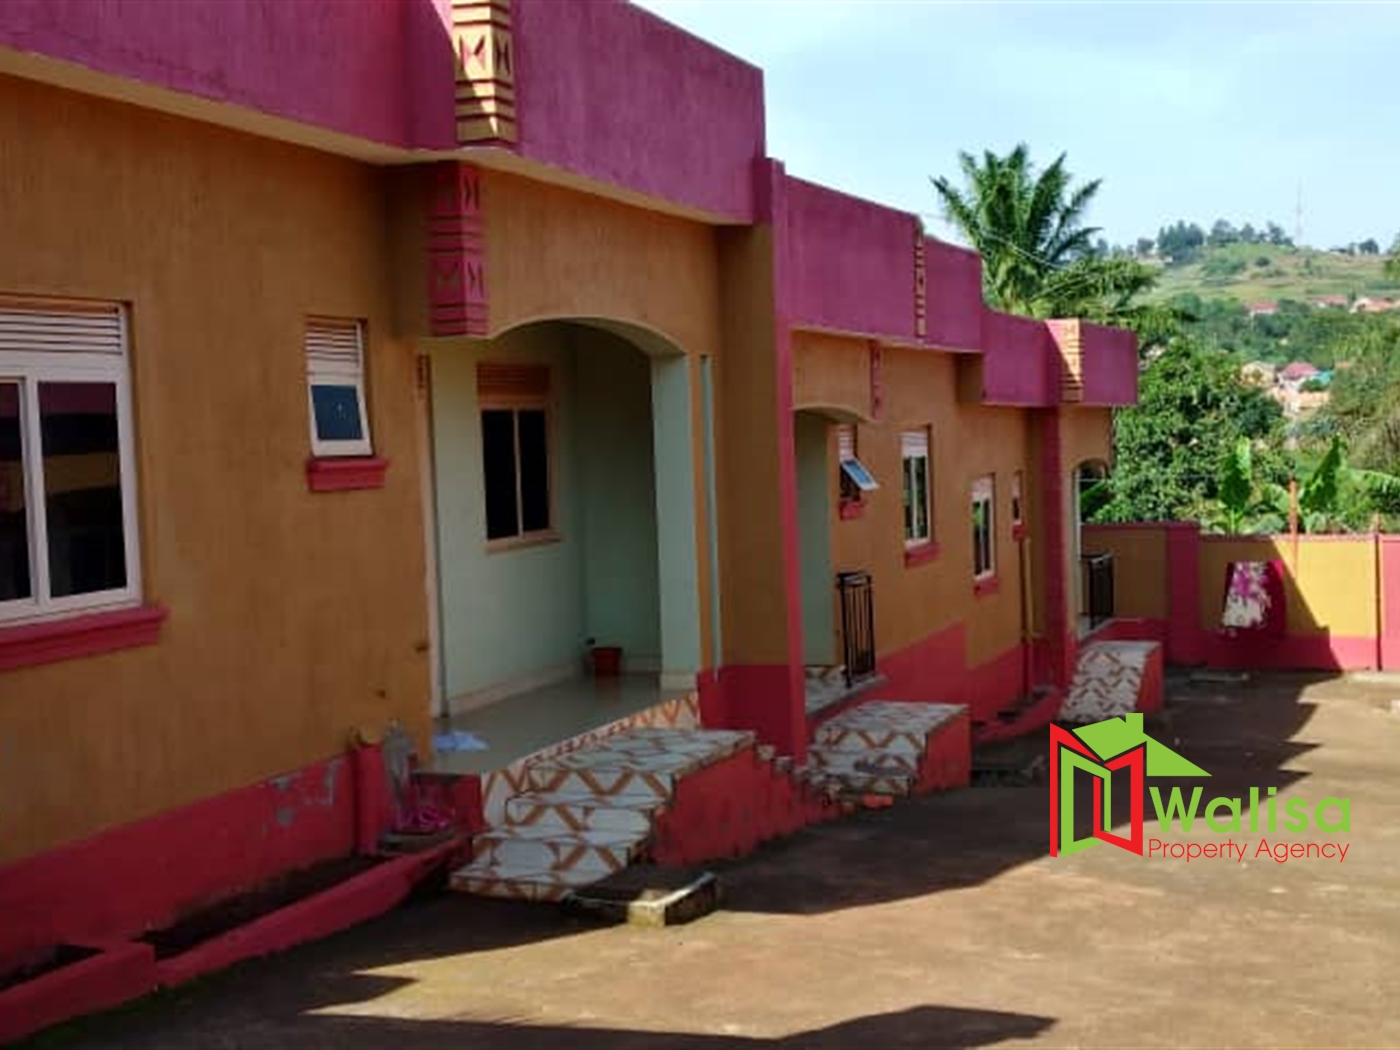 Rental units for sale in Hill Mukono